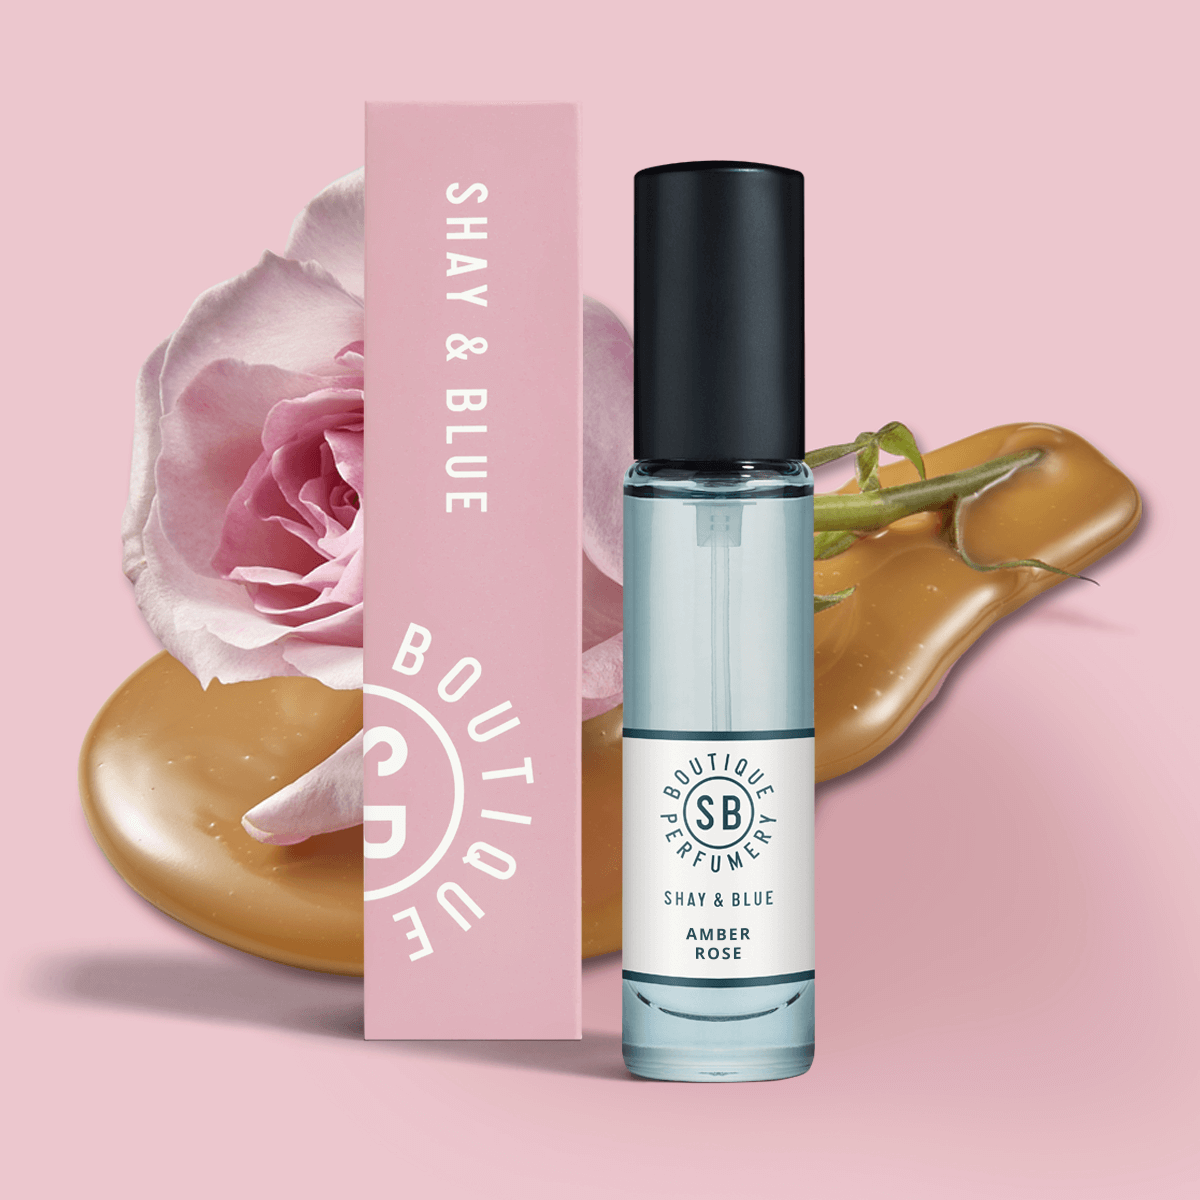 Amber Rose Fragrance 10ml | New season May Rose is blended with white amber and sweet creamy notes. | Clean All Gender Fragrance | Shay & Blue